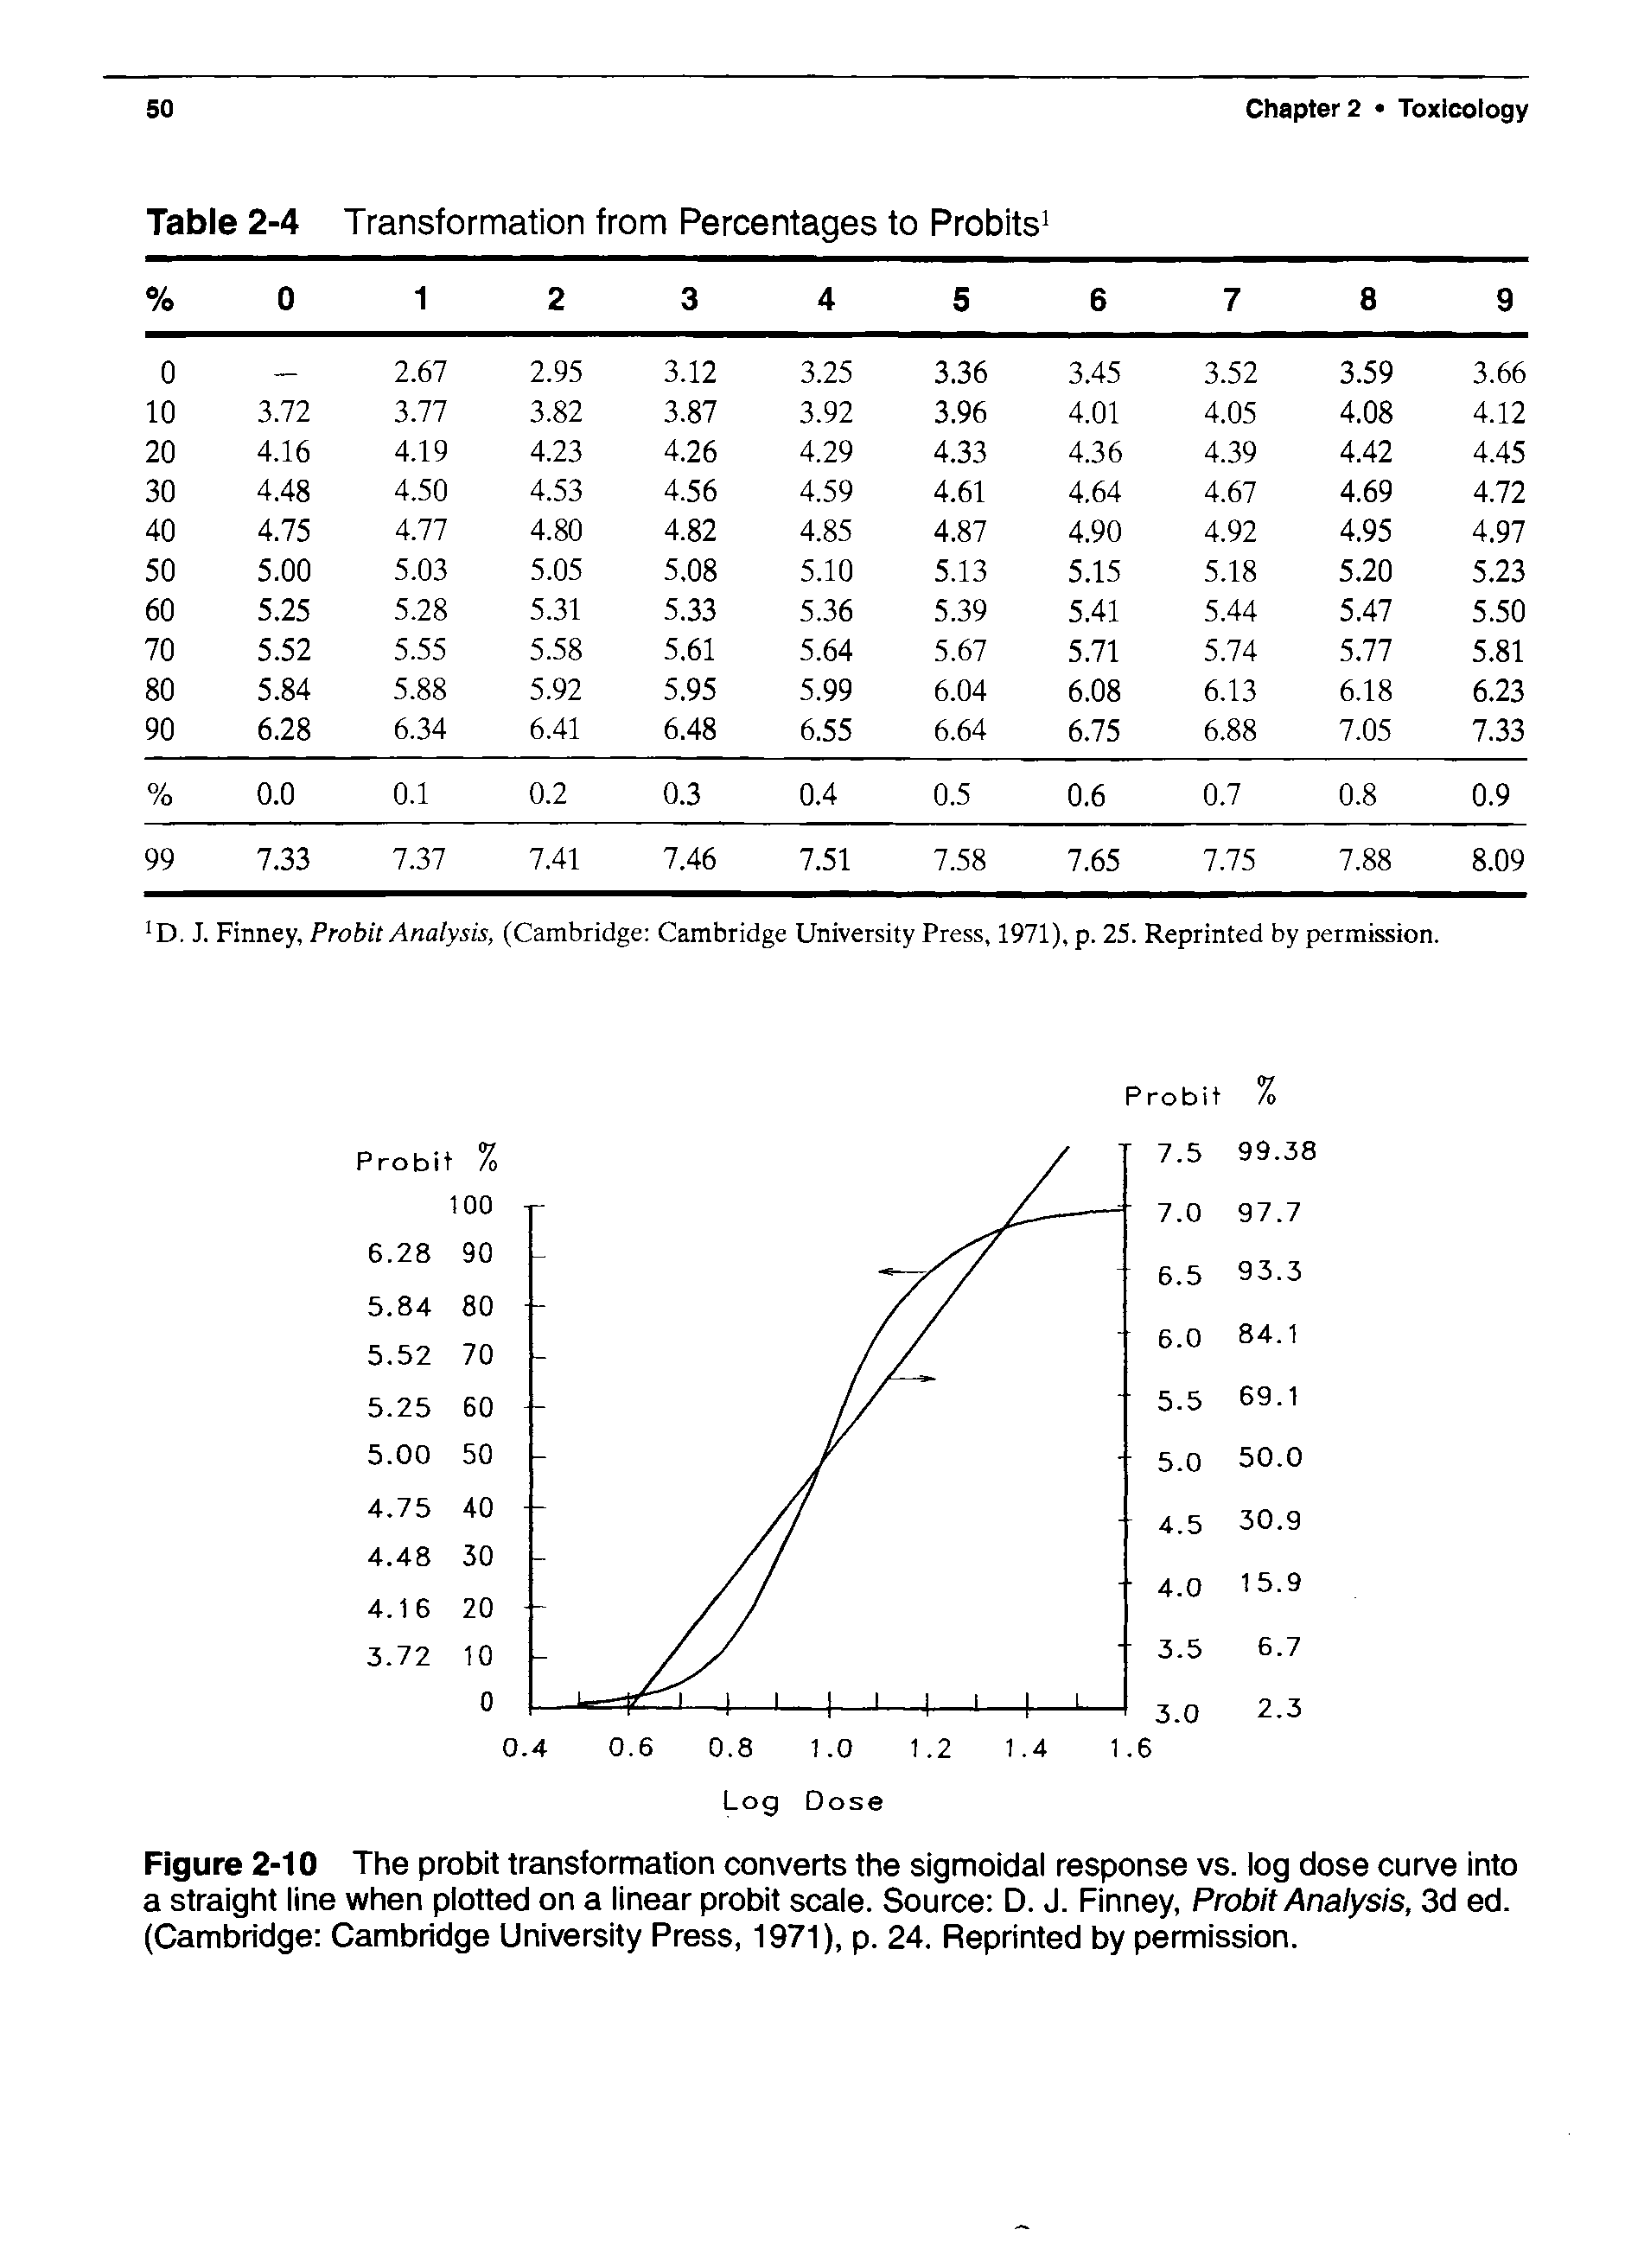 Figure 2-10 The probit transformation converts the sigmoidal response vs. log dose curve into a straight line when plotted on a linear probit scale. Source D. J. Finney, Probit Analysis, 3d ed. (Cambridge Cambridge University Press, 1971), p. 24. Reprinted by permission.